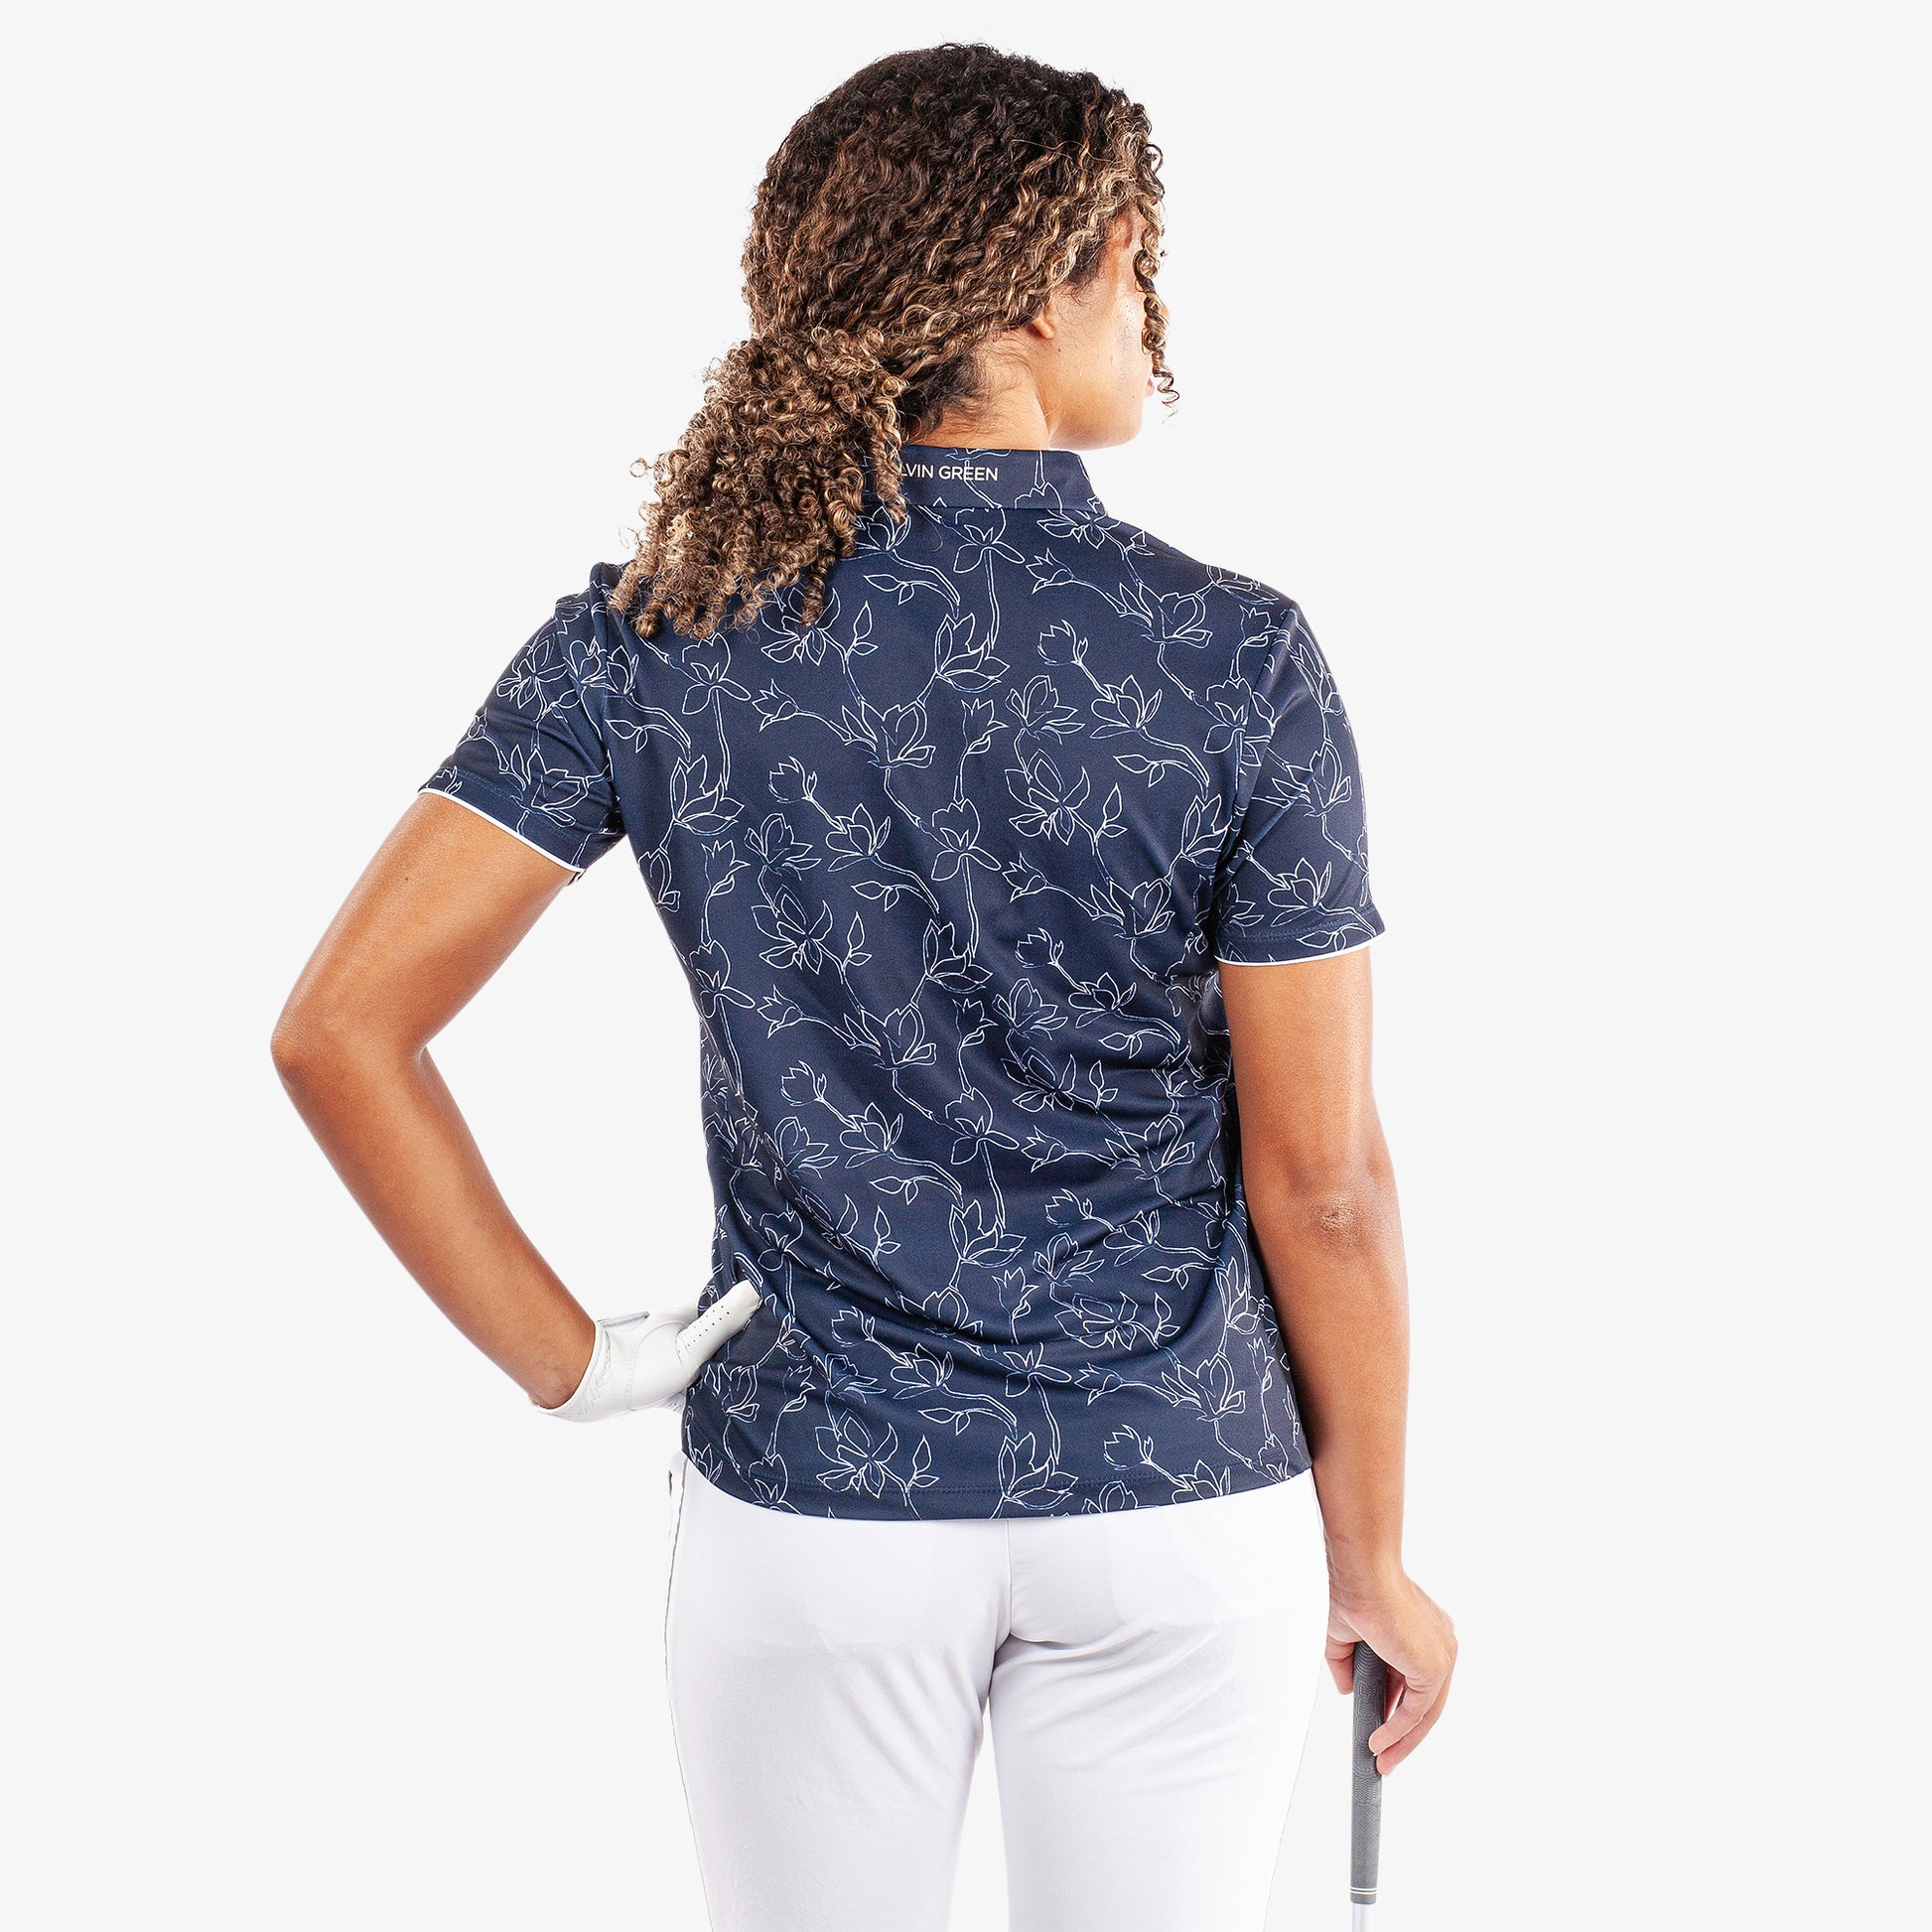 Galvin Green Ladies VENTIL8 PLUS Short Sleeve Polo with Floral Print in Navy